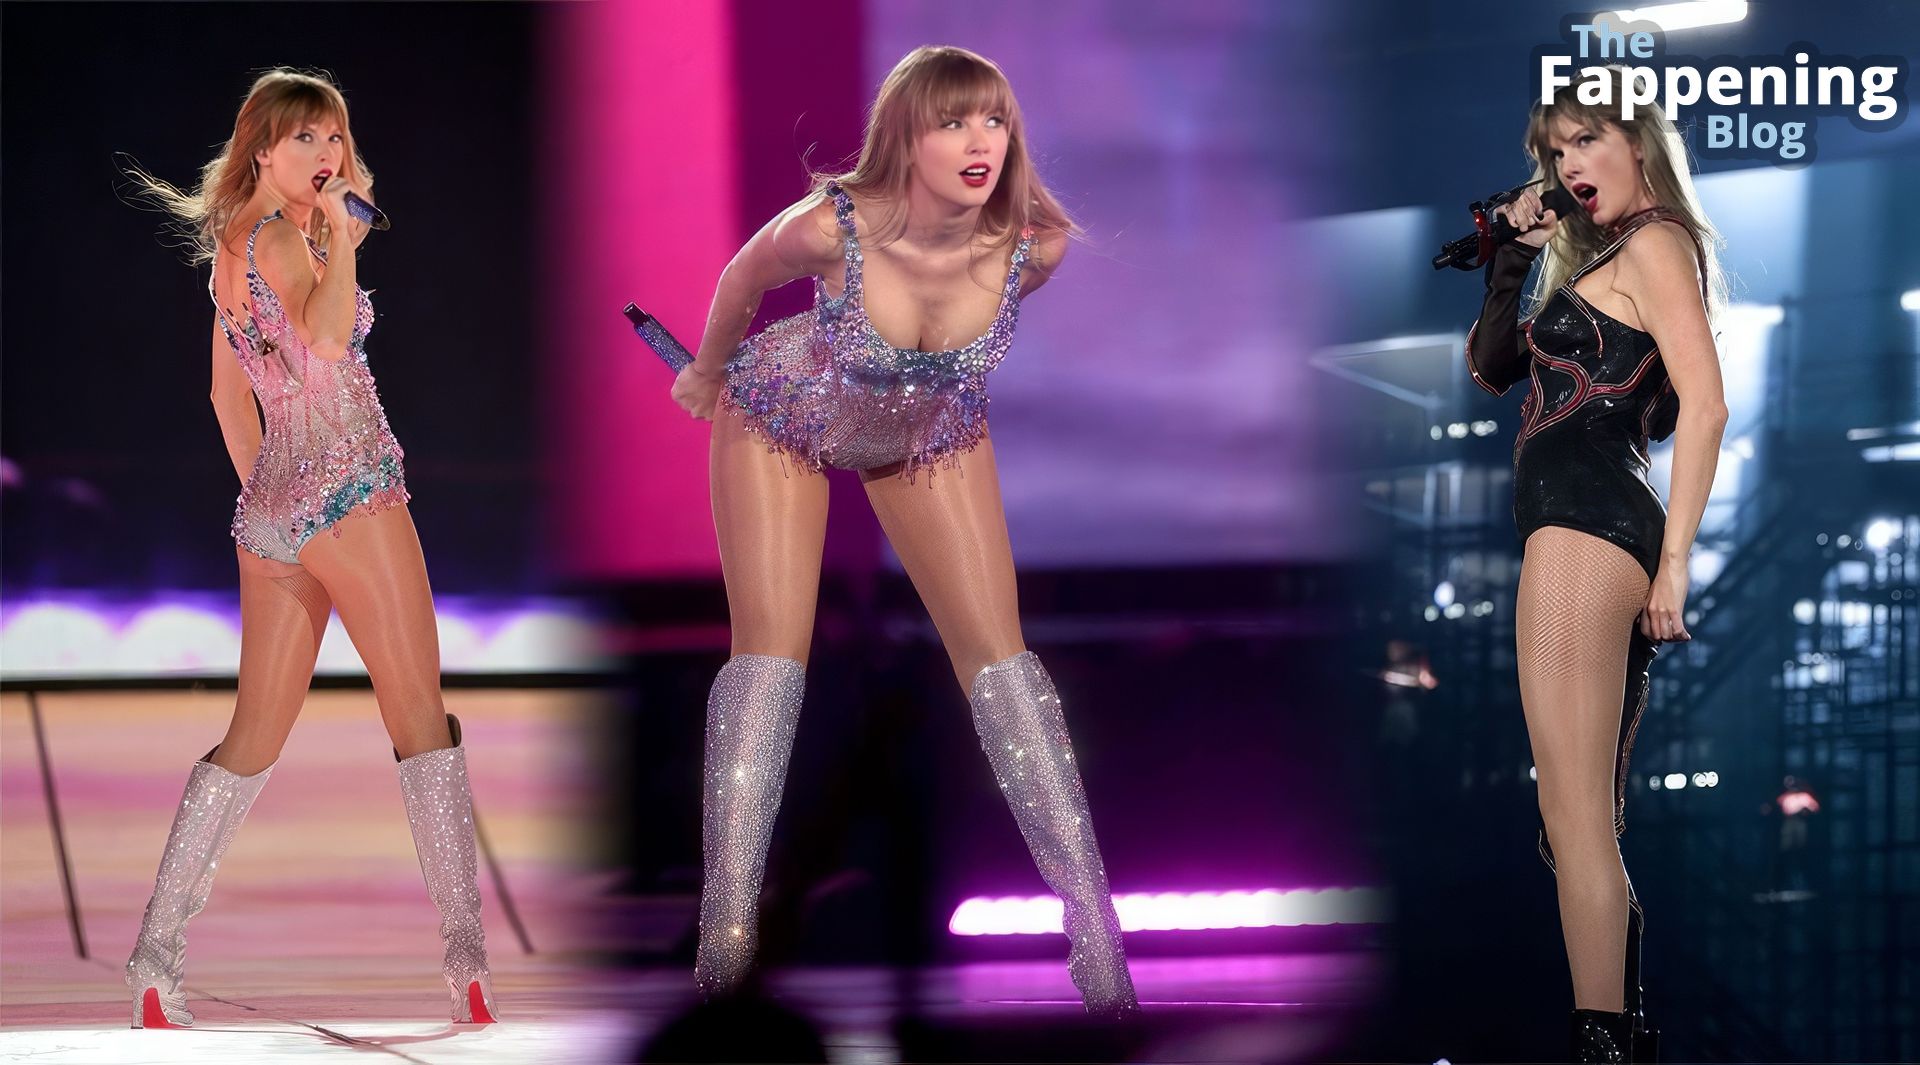 Taylor-Swift-Sexy-Ass-and-Legs-on-Stage-2-thefappeningblog.com_.jpg